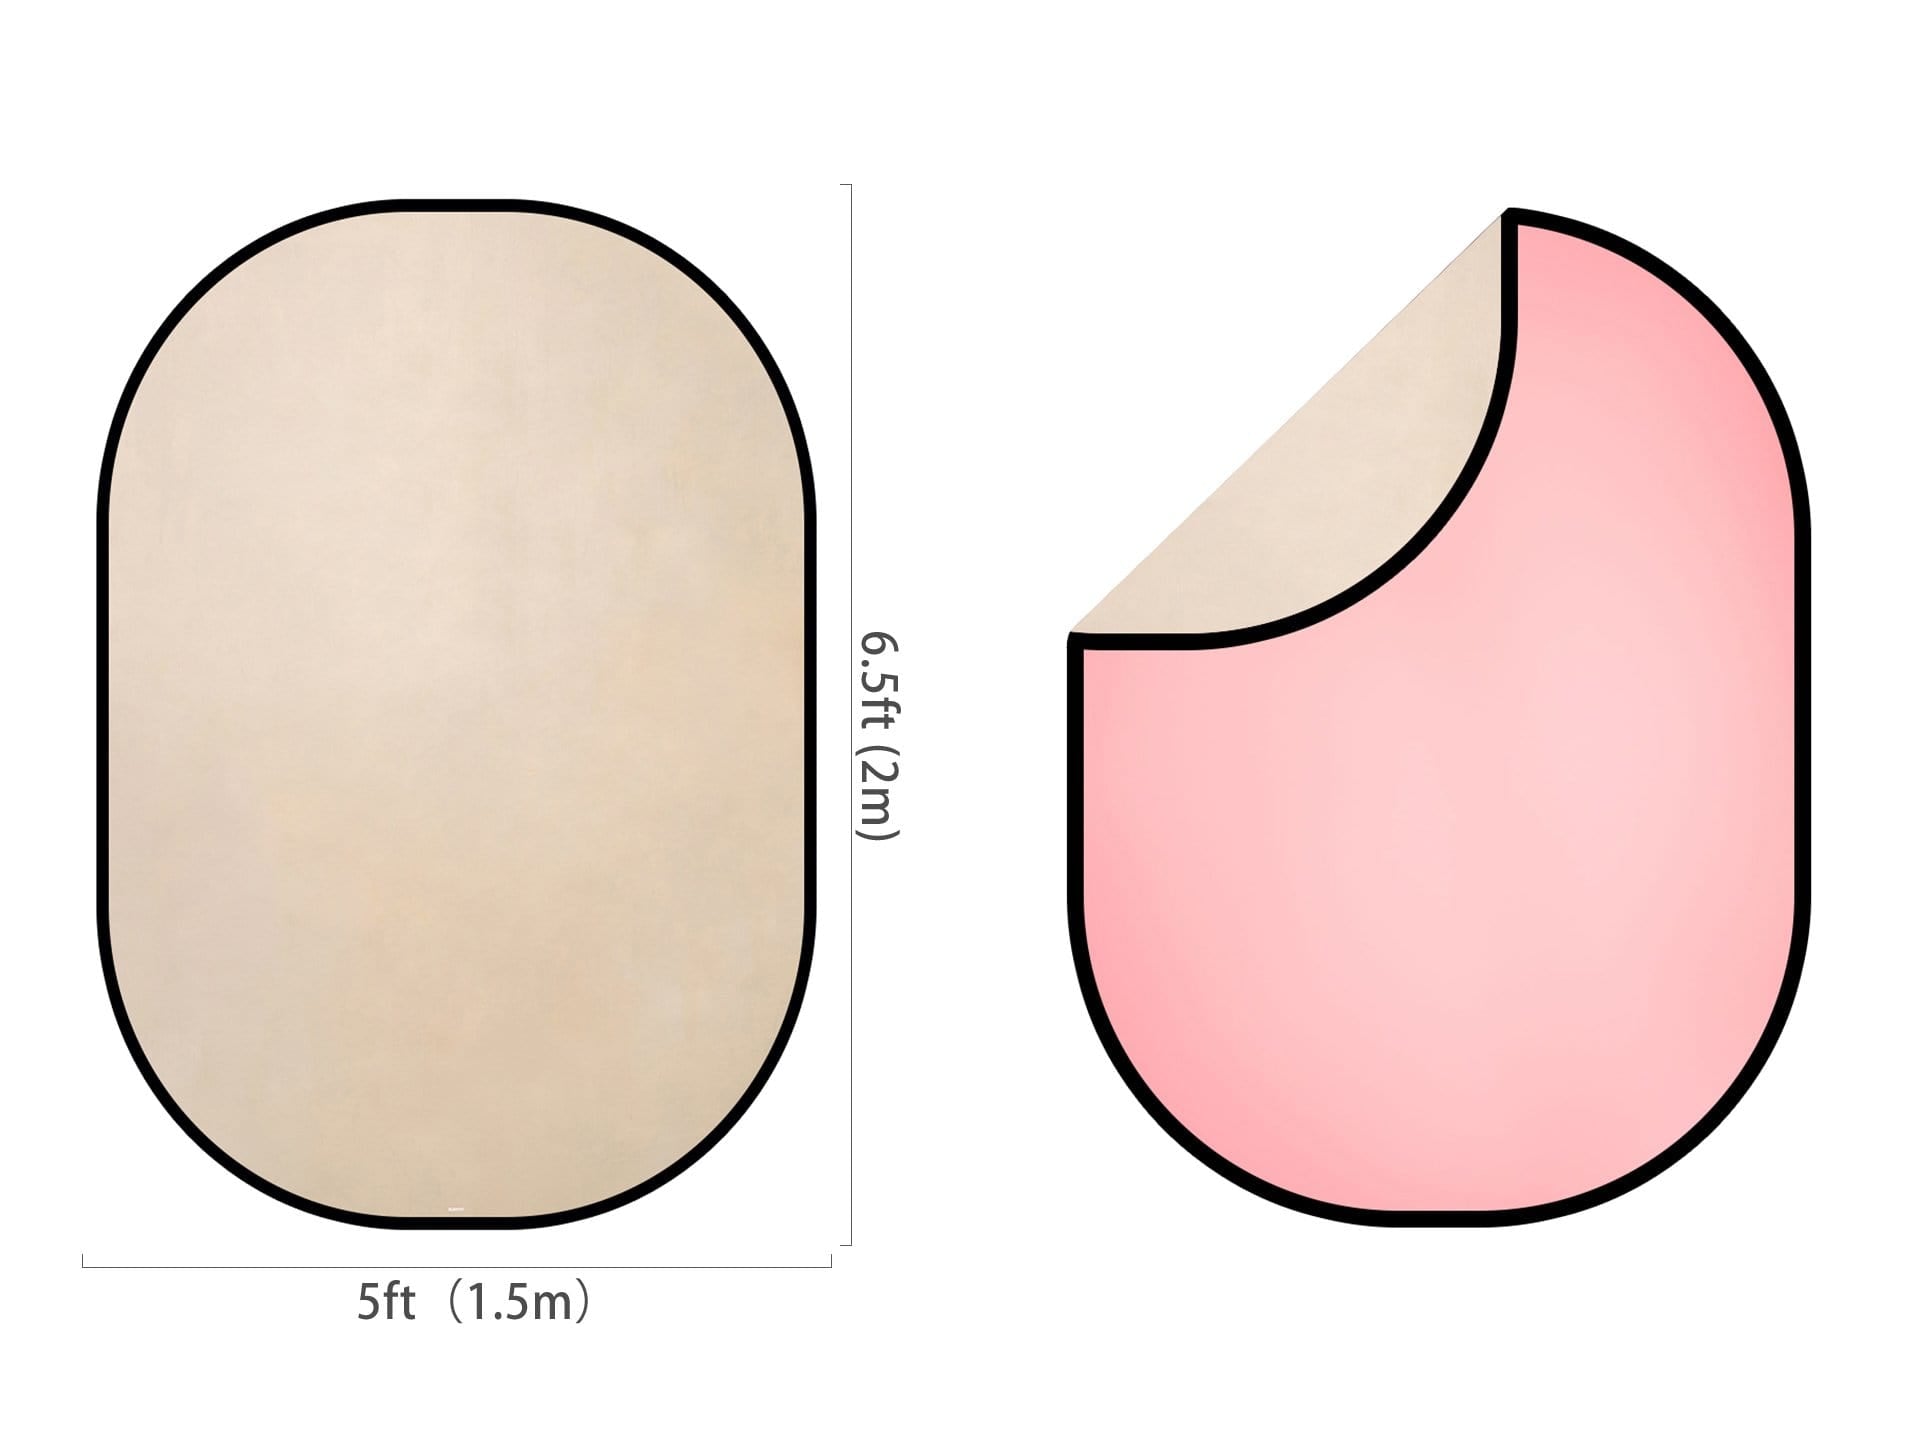 Kate Abstract Cream/Abstract Pink Collapsible Backdrop Photography 5X6.5ft(1.5x2m) - Kate Backdrop